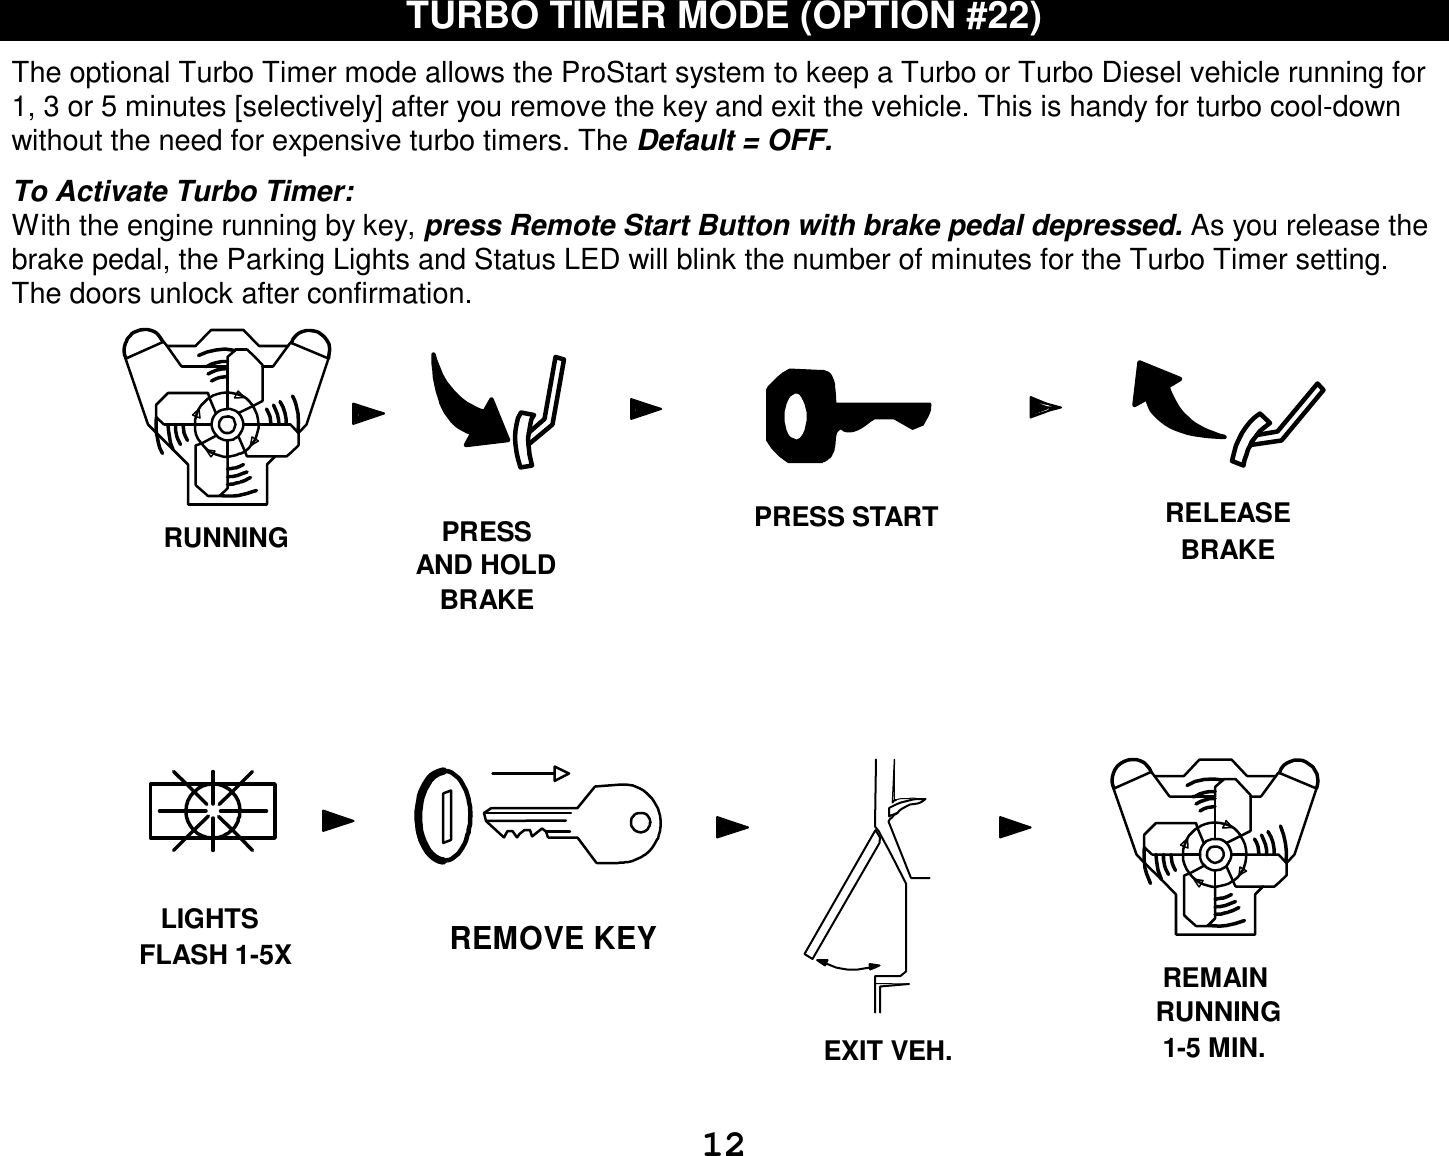  12 TURBO TIMER MODE (OPTION #22)  The optional Turbo Timer mode allows the ProStart system to keep a Turbo or Turbo Diesel vehicle running for 1, 3 or 5 minutes [selectively] after you remove the key and exit the vehicle. This is handy for turbo cool-down without the need for expensive turbo timers. The Default = OFF.  To Activate Turbo Timer: With the engine running by key, press Remote Start Button with brake pedal depressed. As you release the brake pedal, the Parking Lights and Status LED will blink the number of minutes for the Turbo Timer setting. The doors unlock after confirmation.      REMOVE KEYFLASH 1-5XEXIT VEH.PRESSAND HOLDBRAKERUNNING RELEASEBRAKELIGHTSRUNNINGREMAIN1-5 MIN.PRESS START 